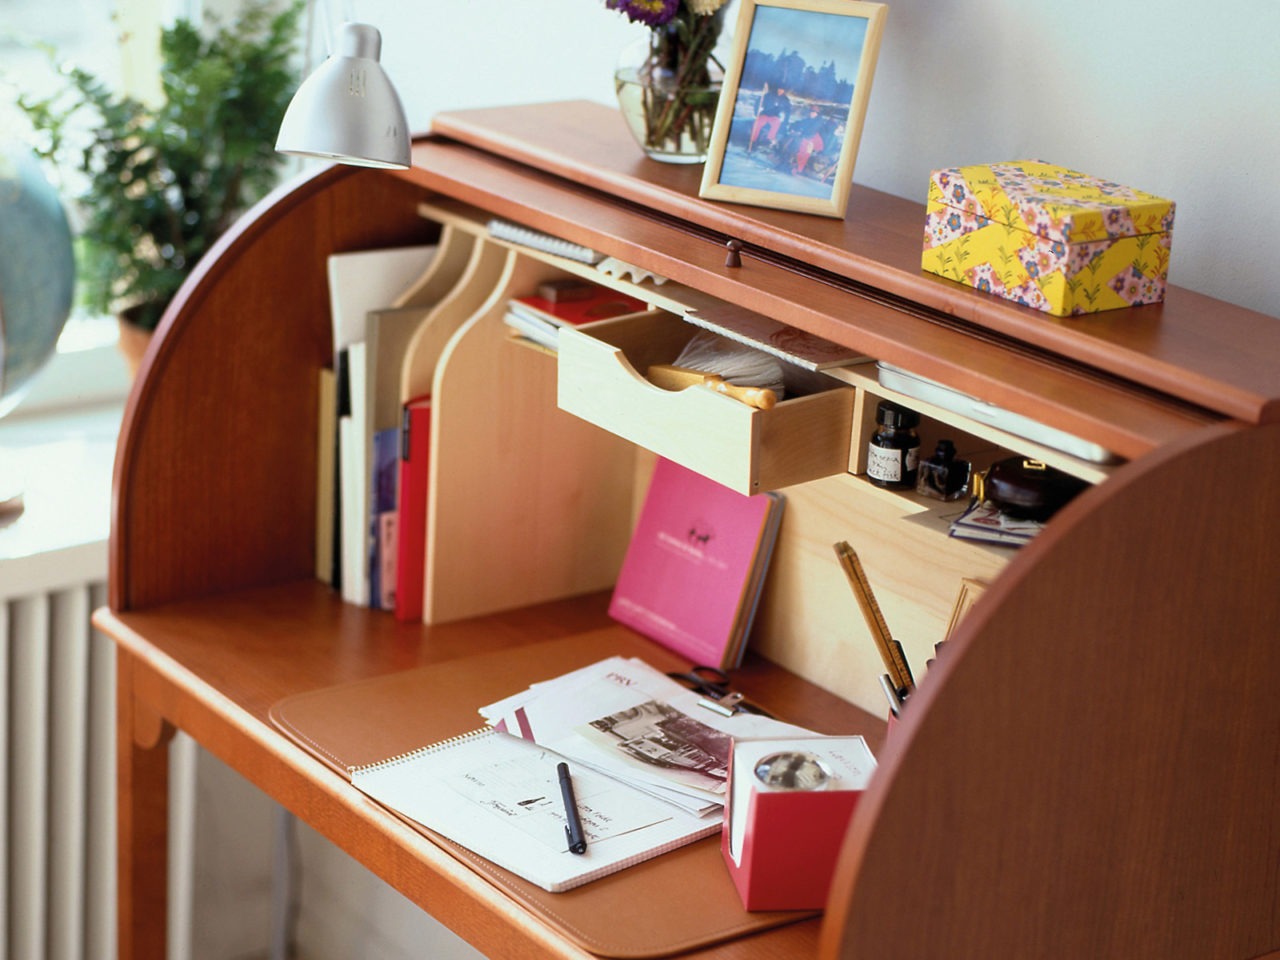 Brown bureau filled with papers, books, photos and decorative items.